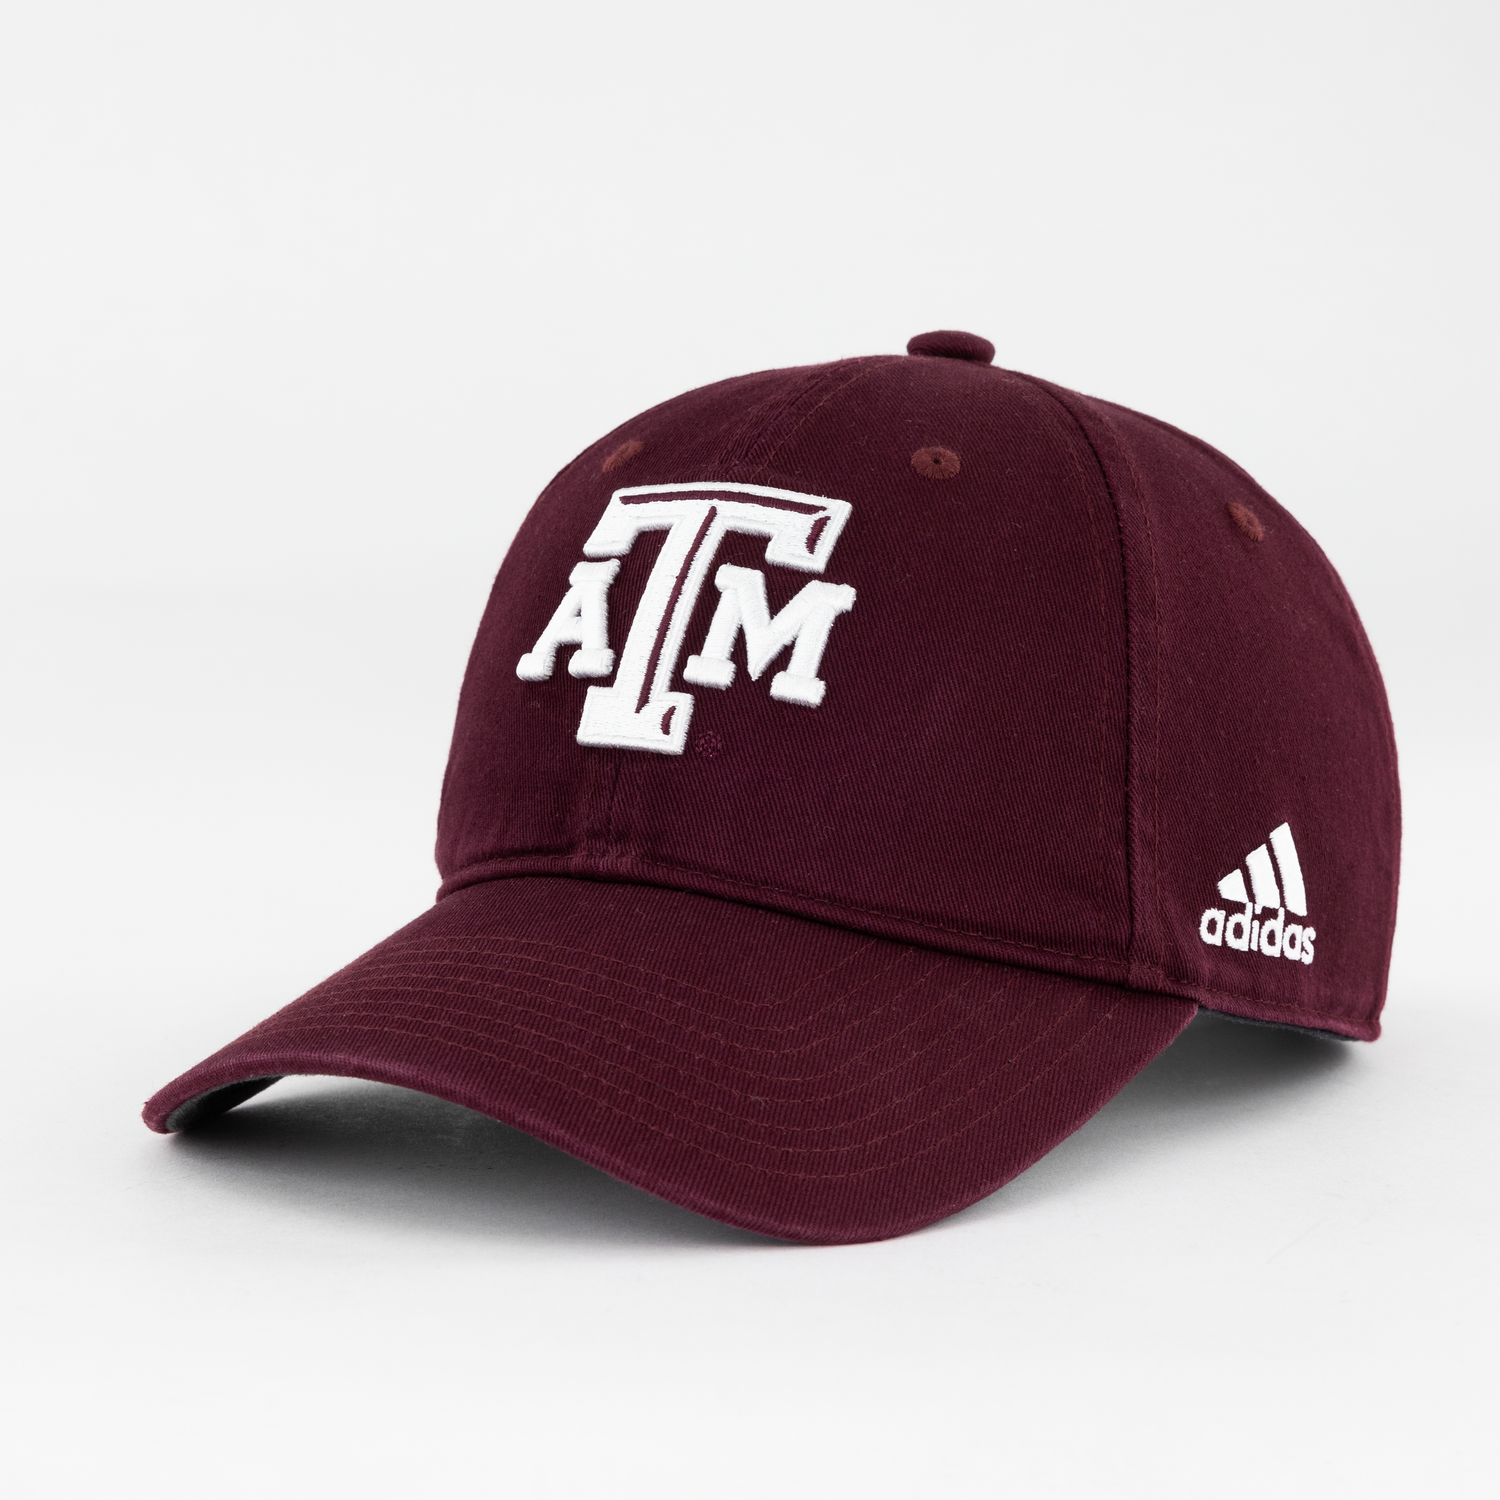 Texas A&M Adidas Slouch Hat